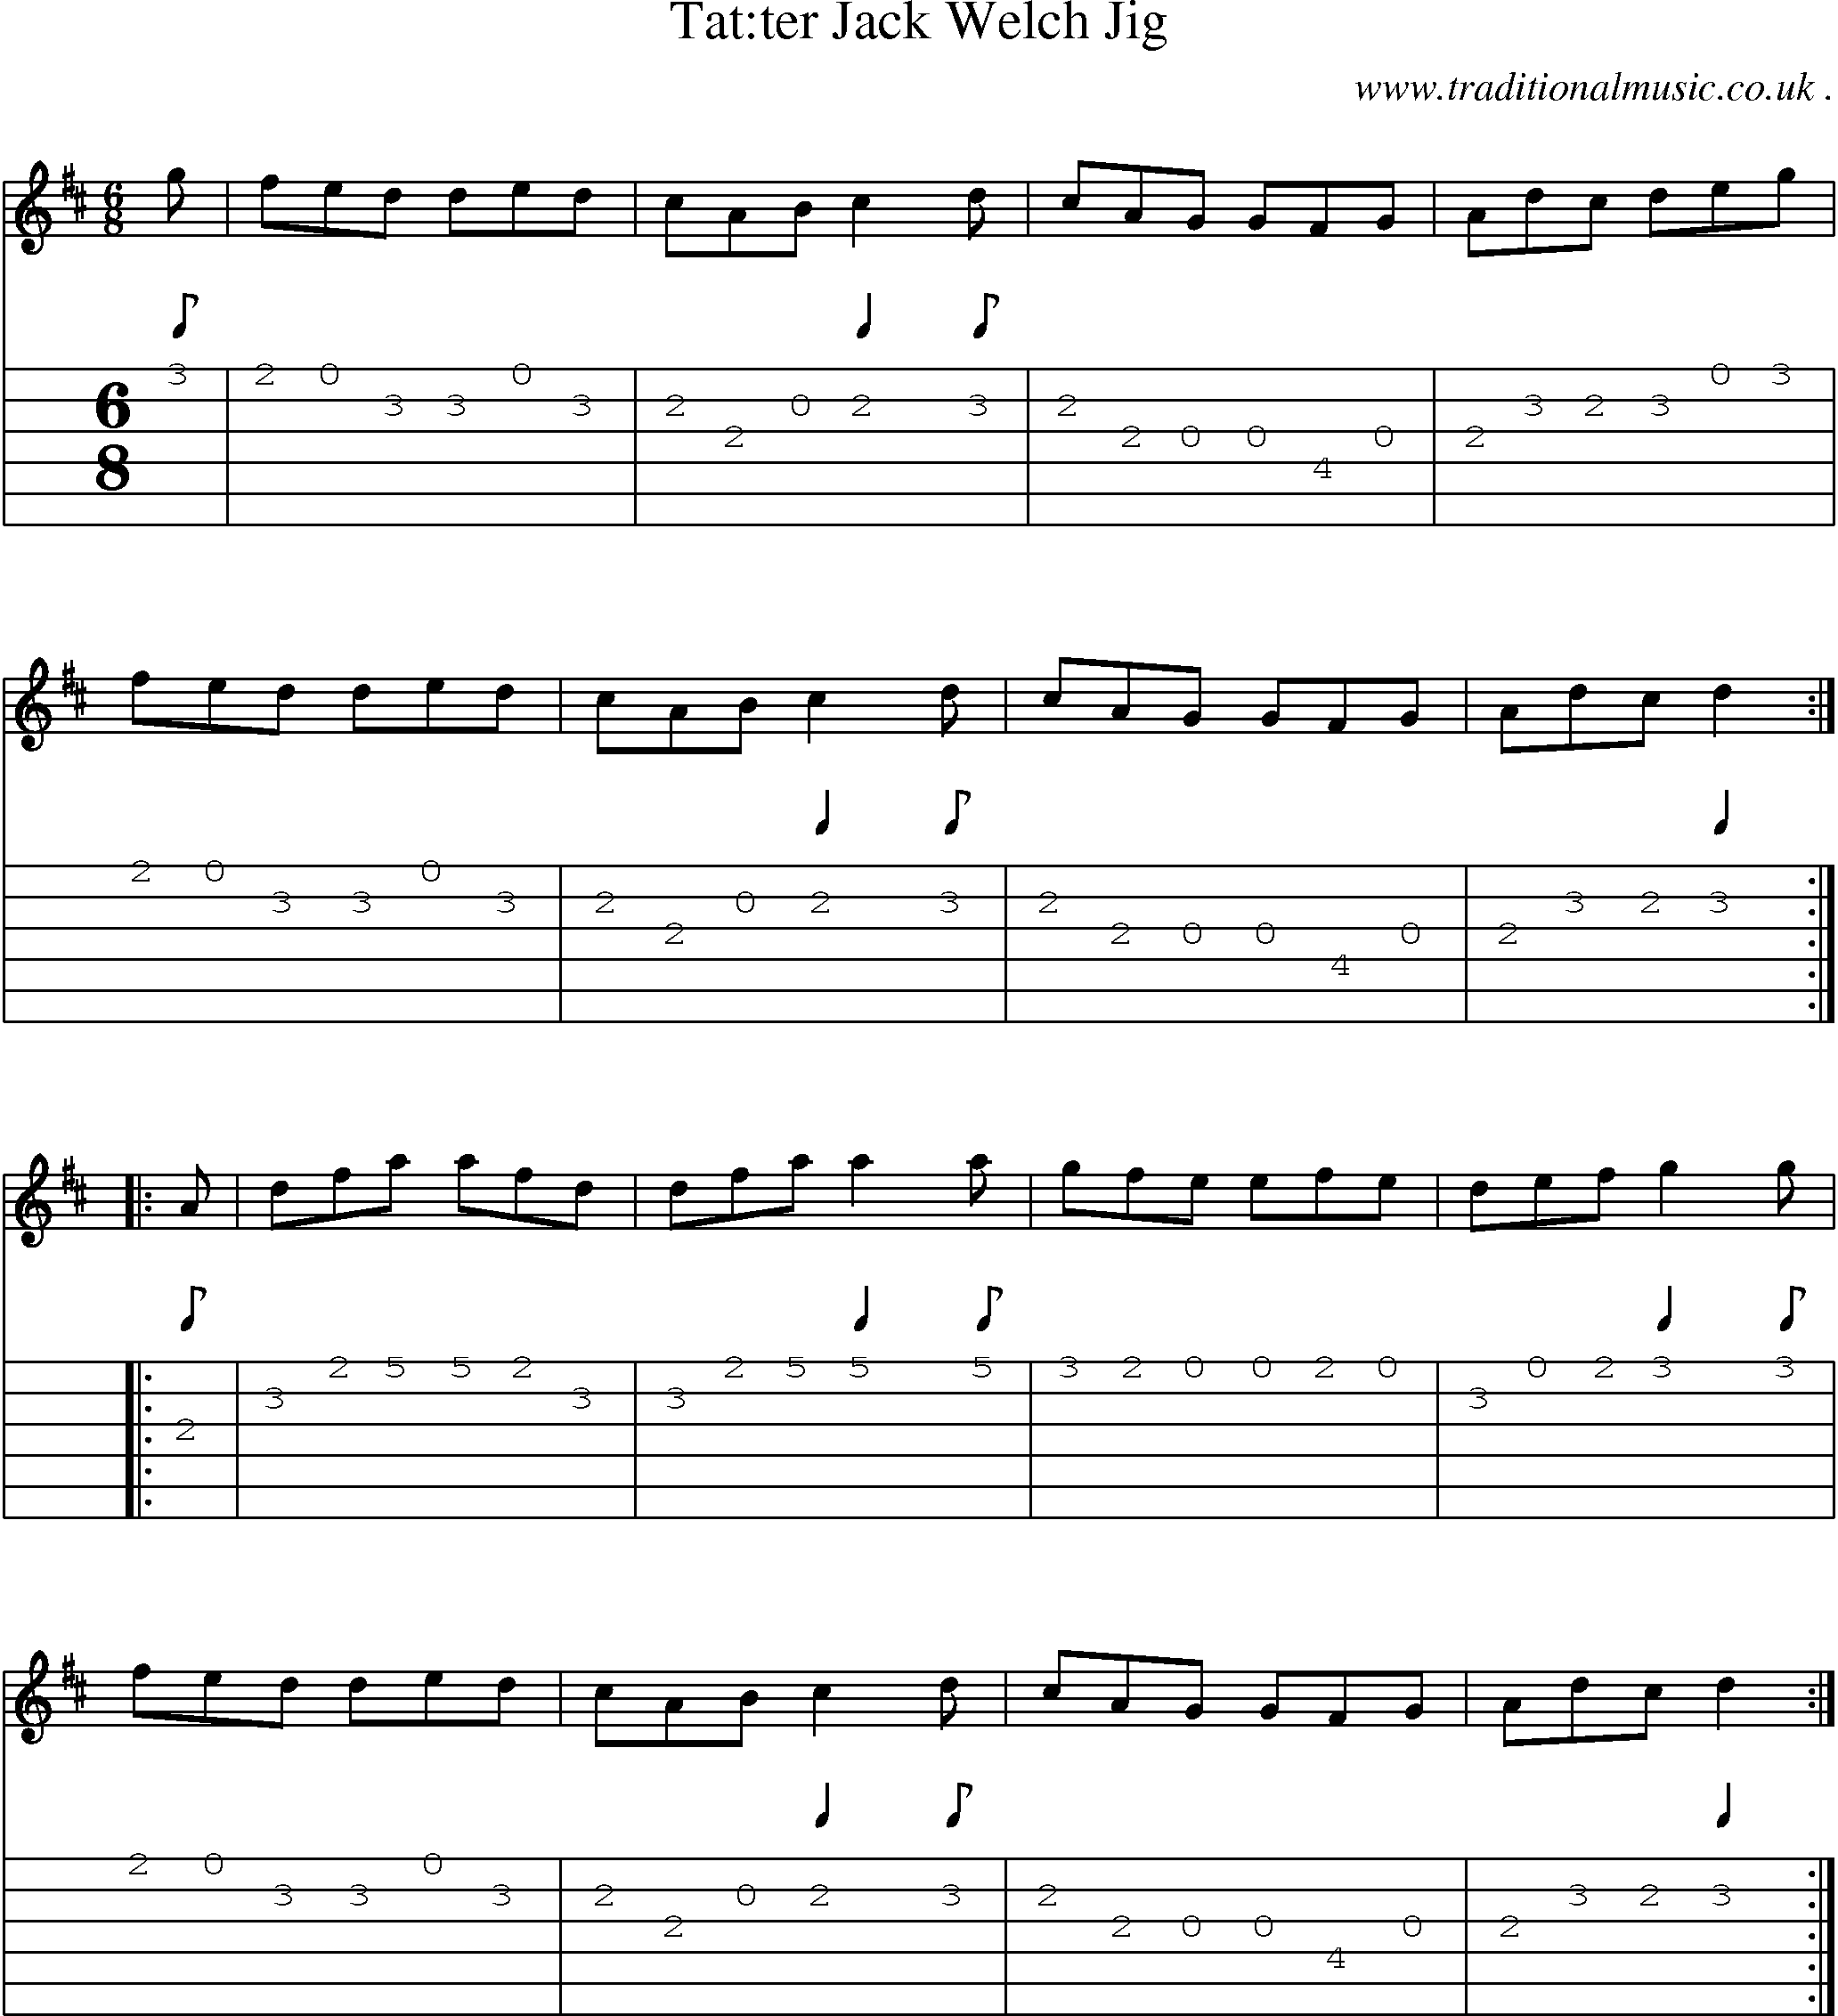 Sheet-Music and Guitar Tabs for Tatter Jack Welch Jig